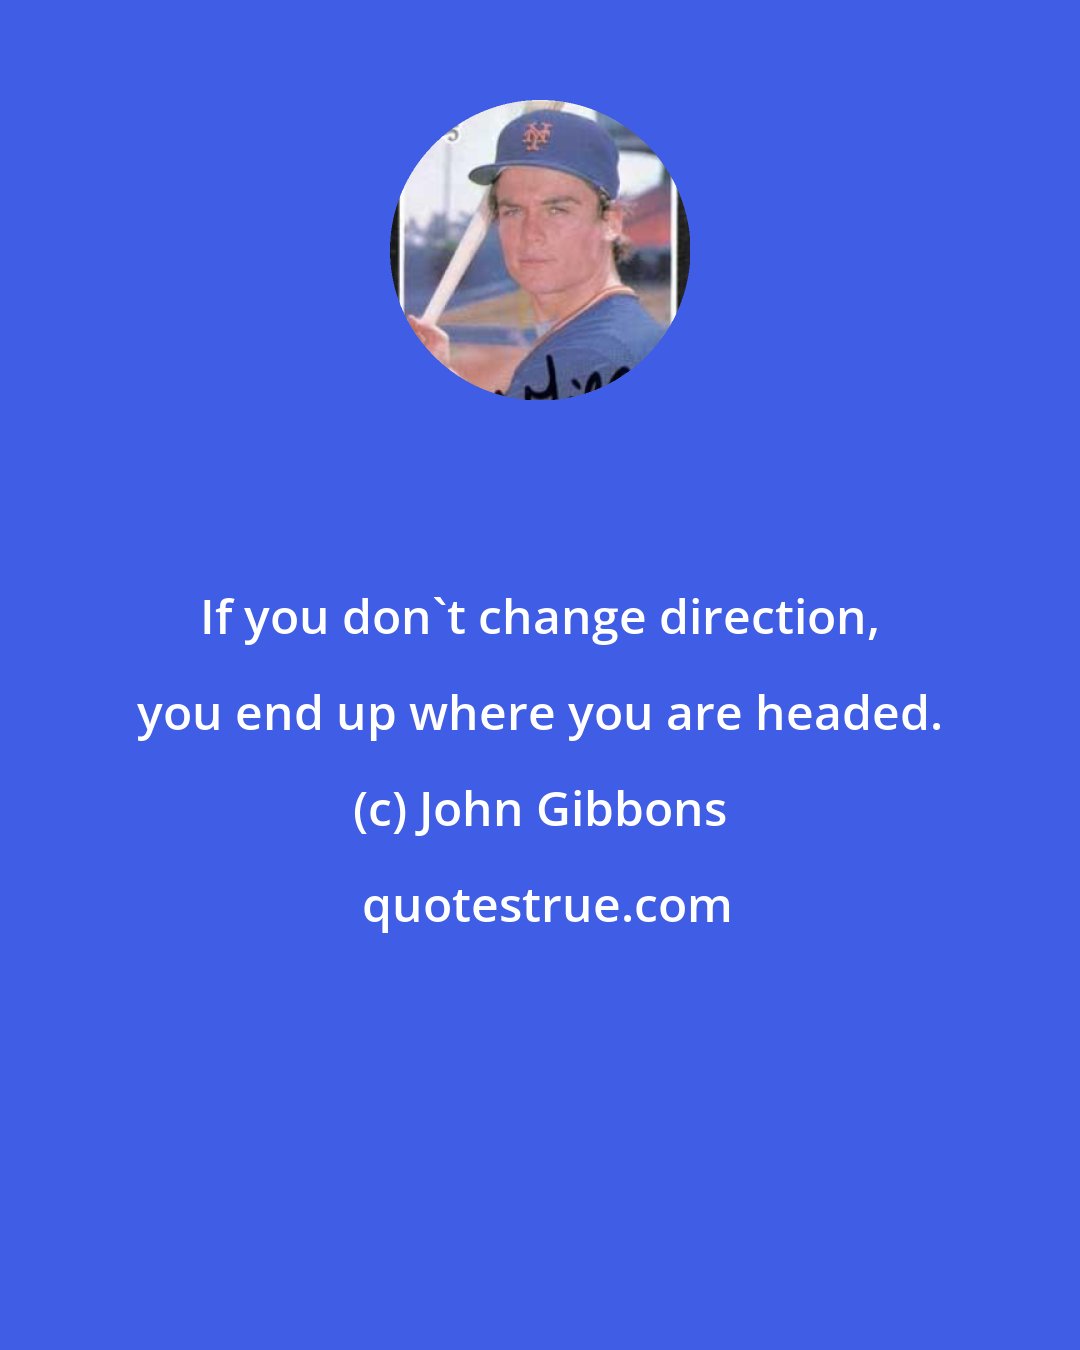 John Gibbons: If you don't change direction, you end up where you are headed.